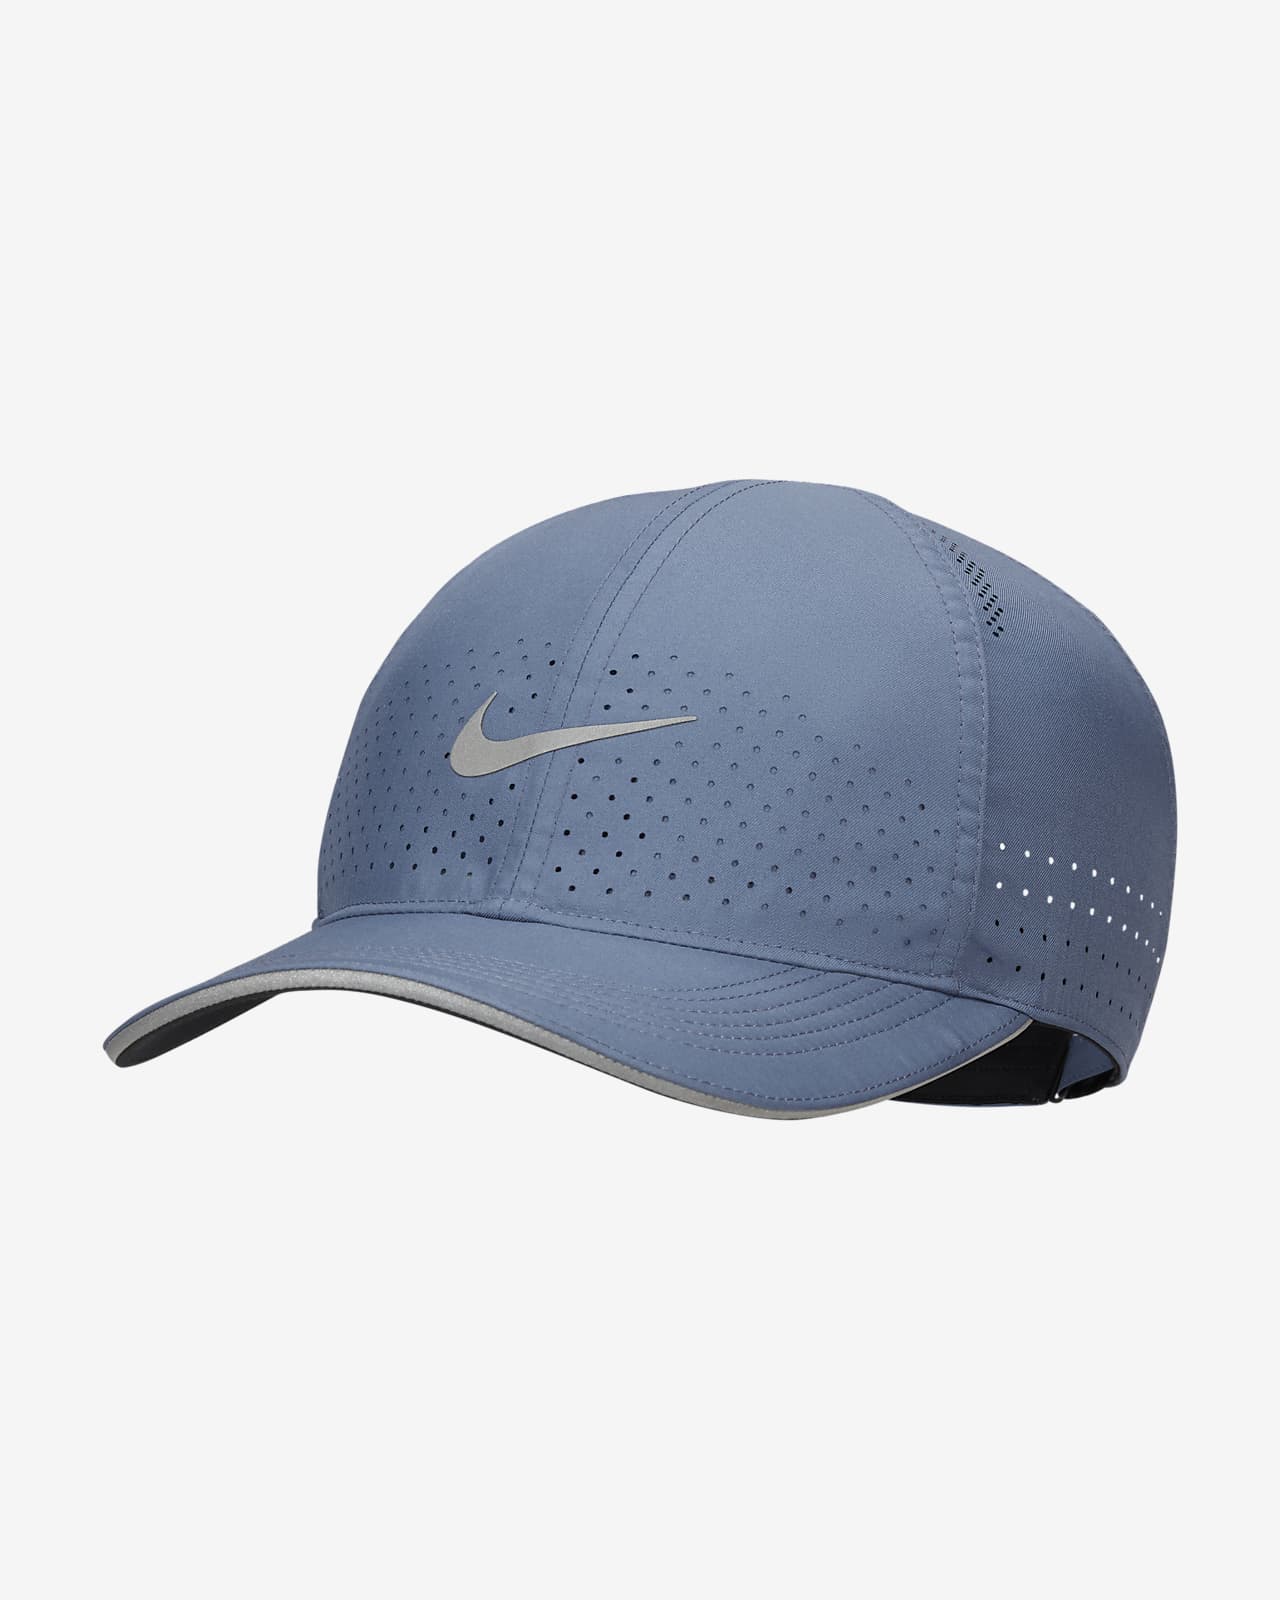 Mount Bank Bestaan Conceit Nike Dri-FIT Aerobill Featherlight Perforated Running Cap. Nike.com